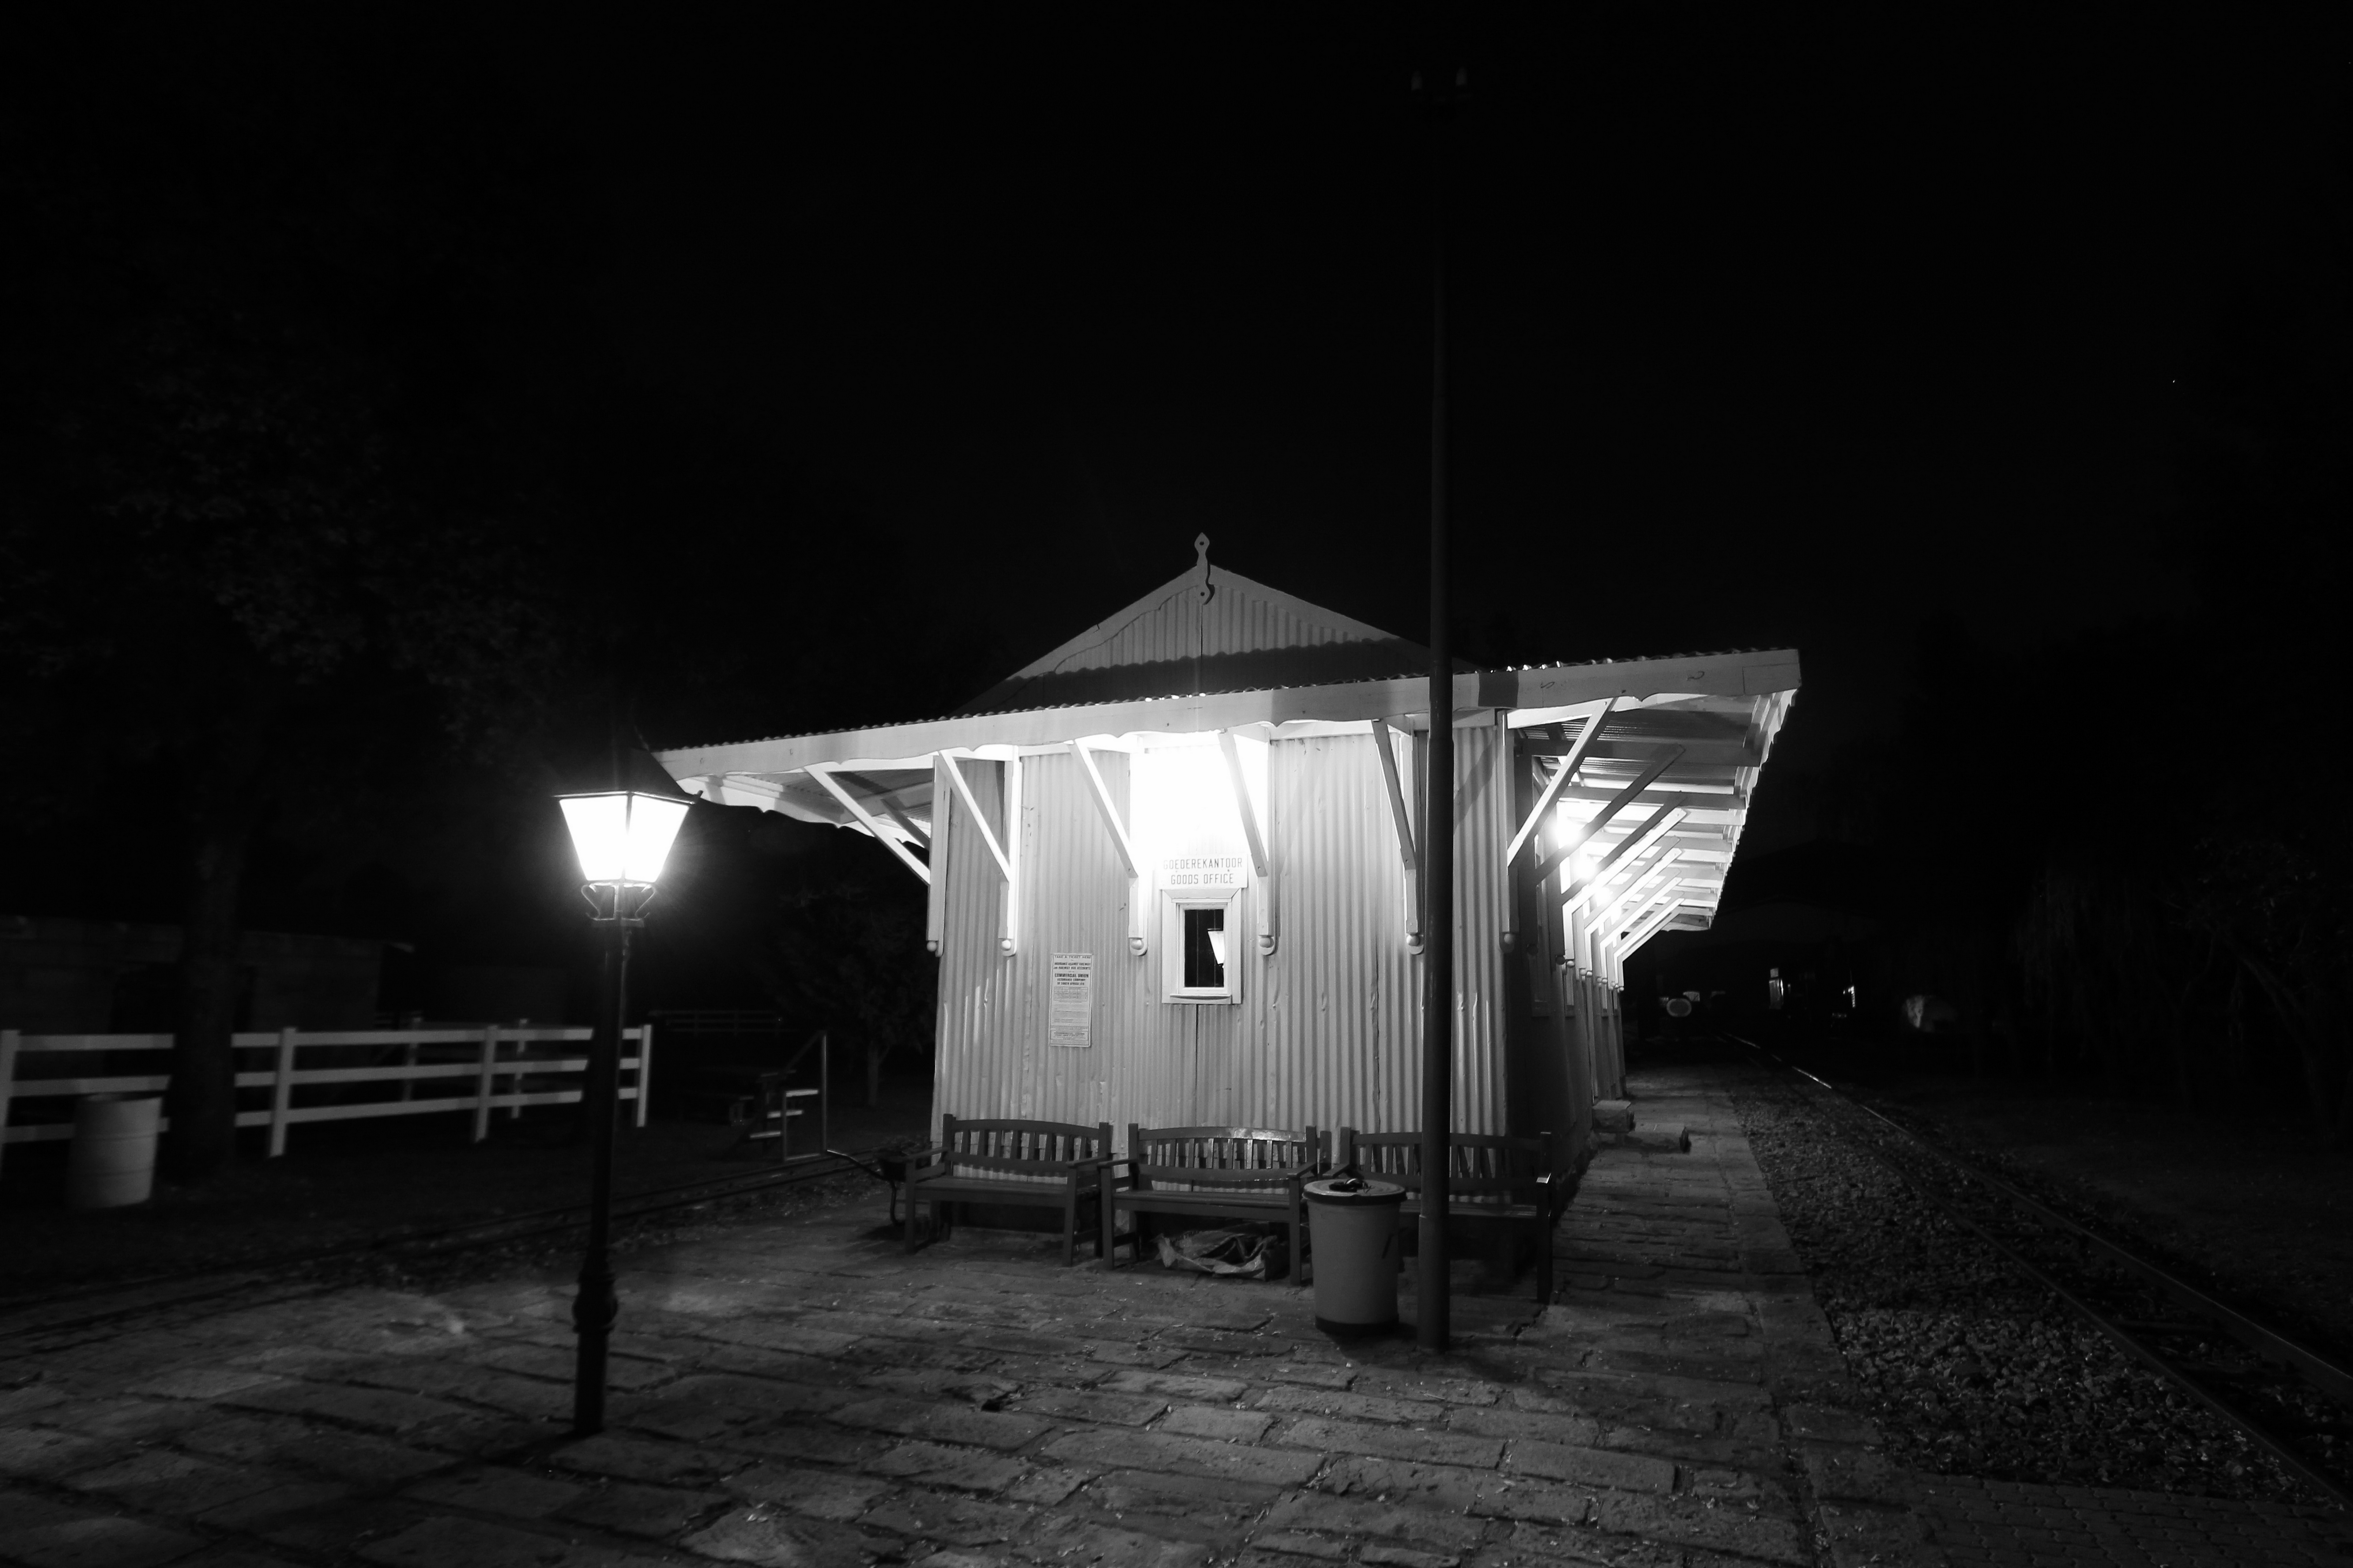 South African Baby Boomers who rode the once-incredible national railway system will all remember the lonely sidings late at night, in the middle of nowhere. Image: Chris Marais